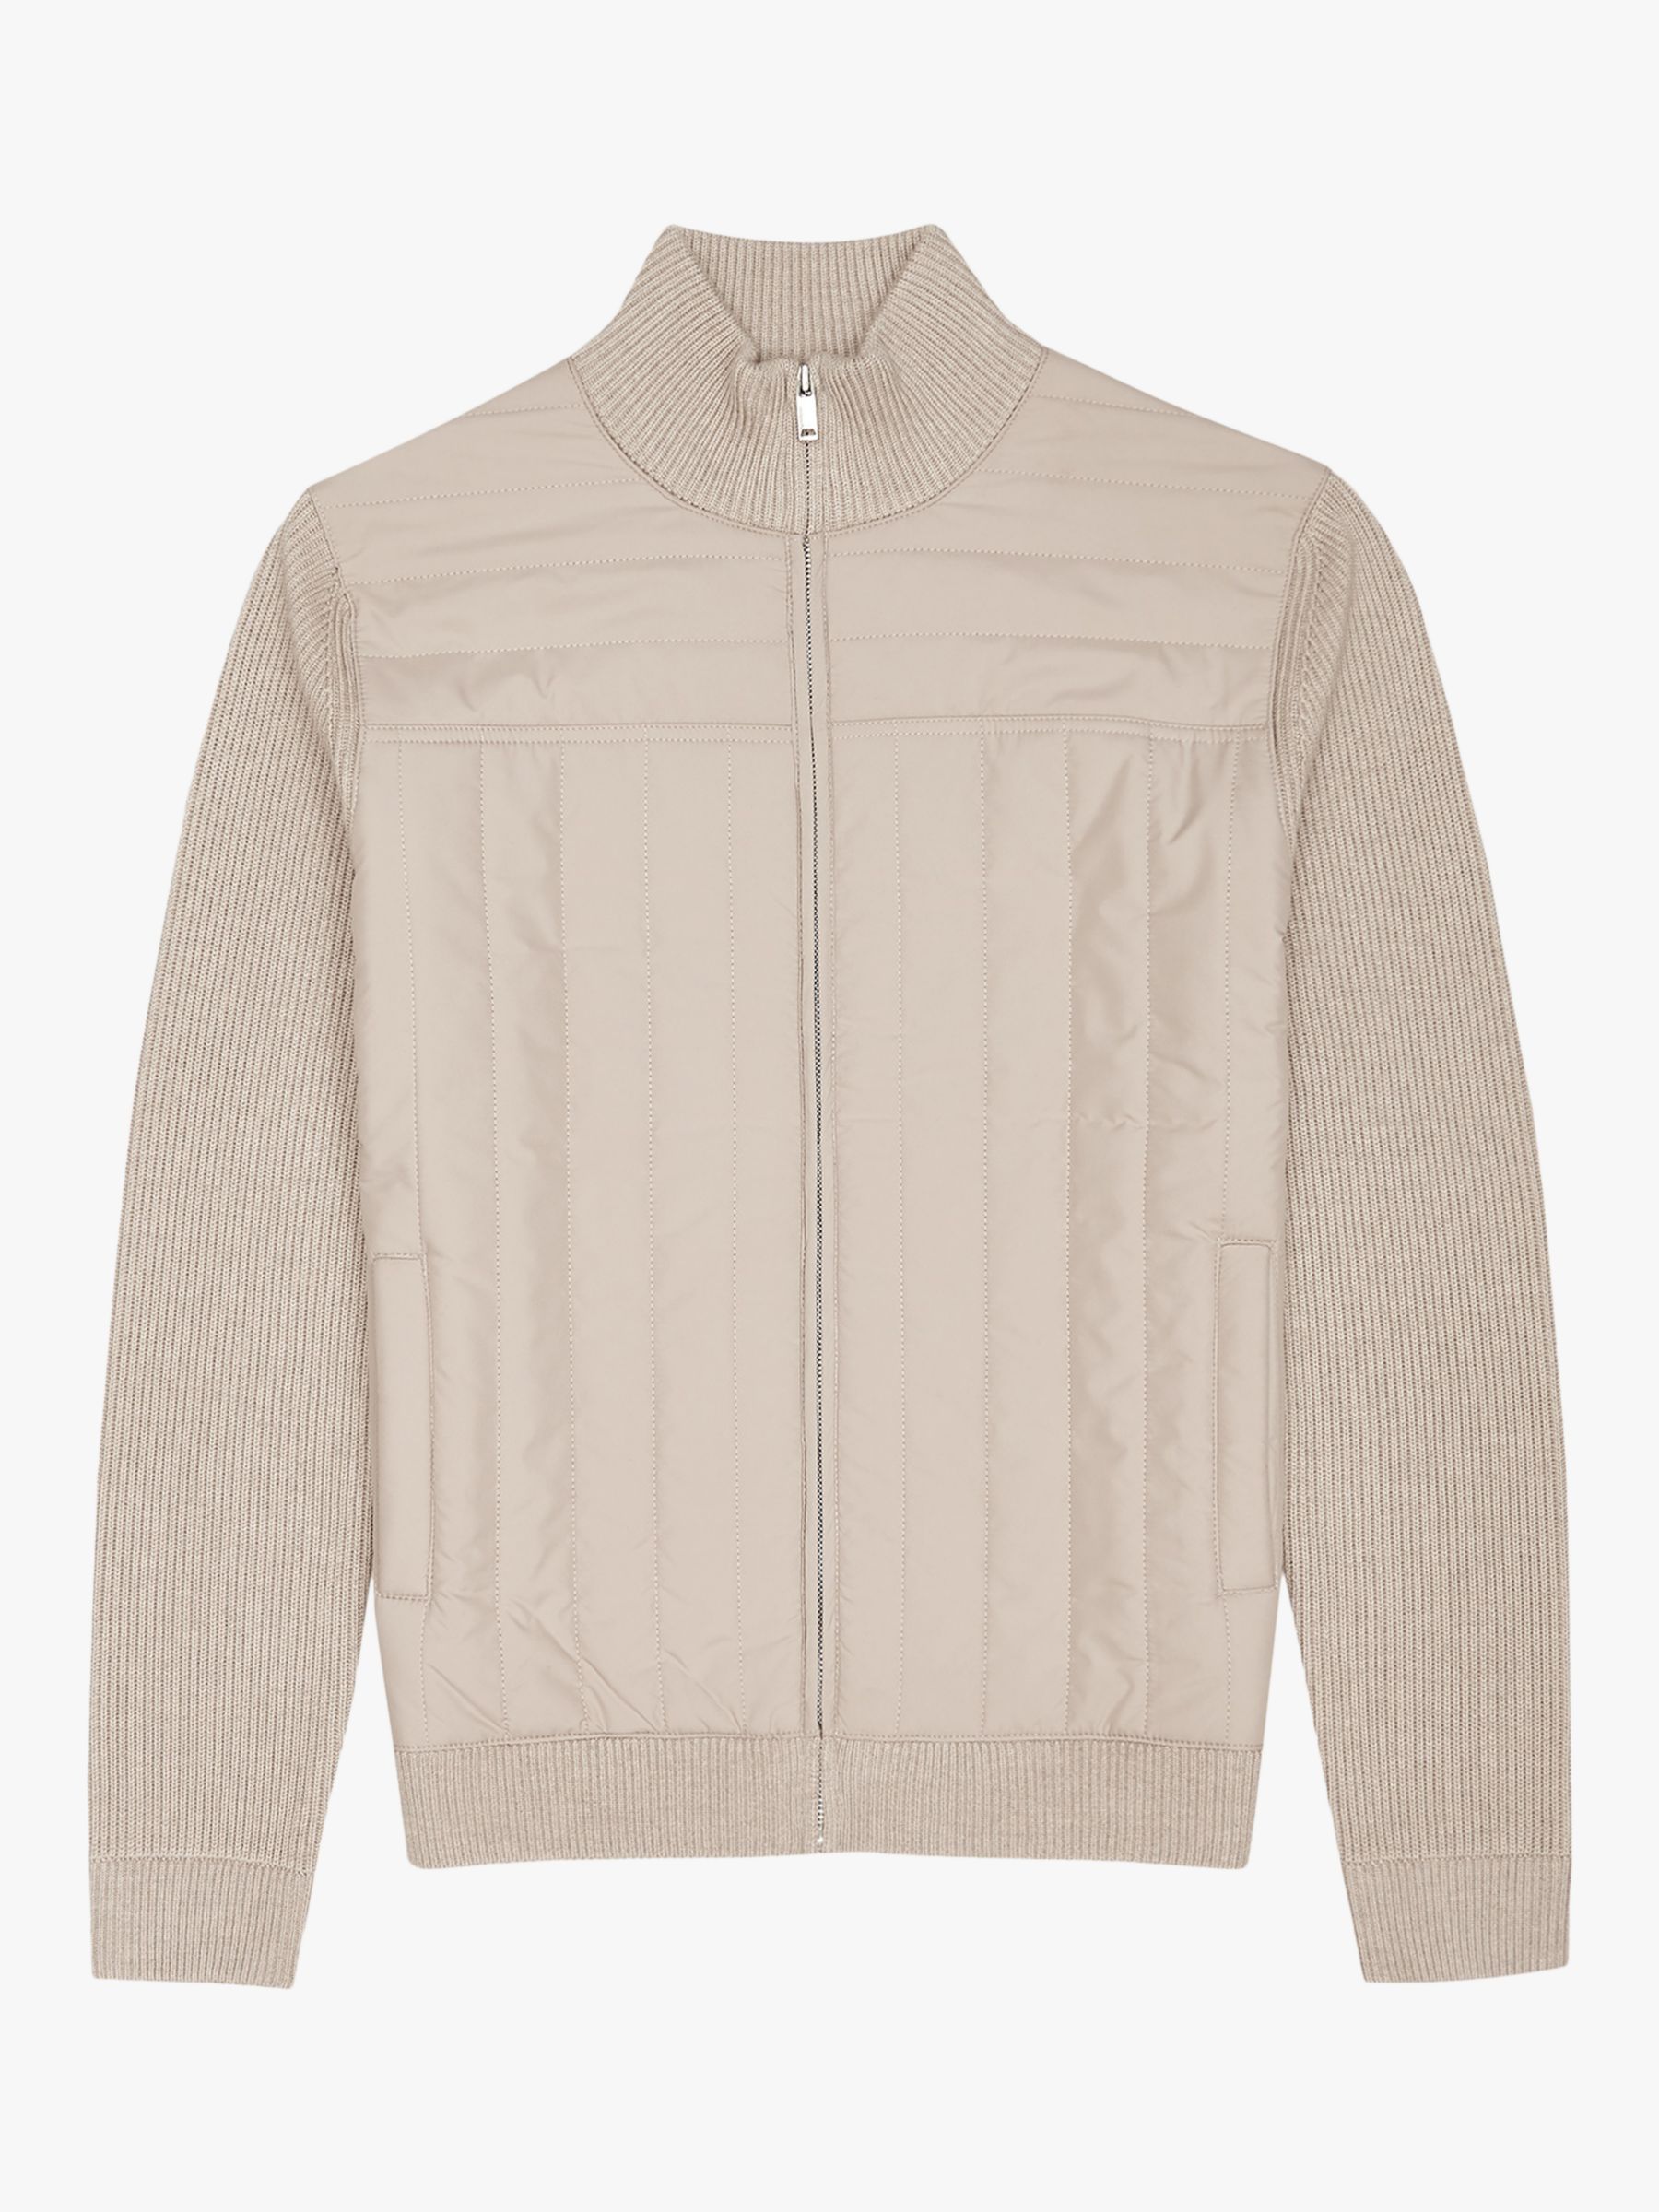 Reiss Quentin Quilted Knit Jacket, Oatmeal